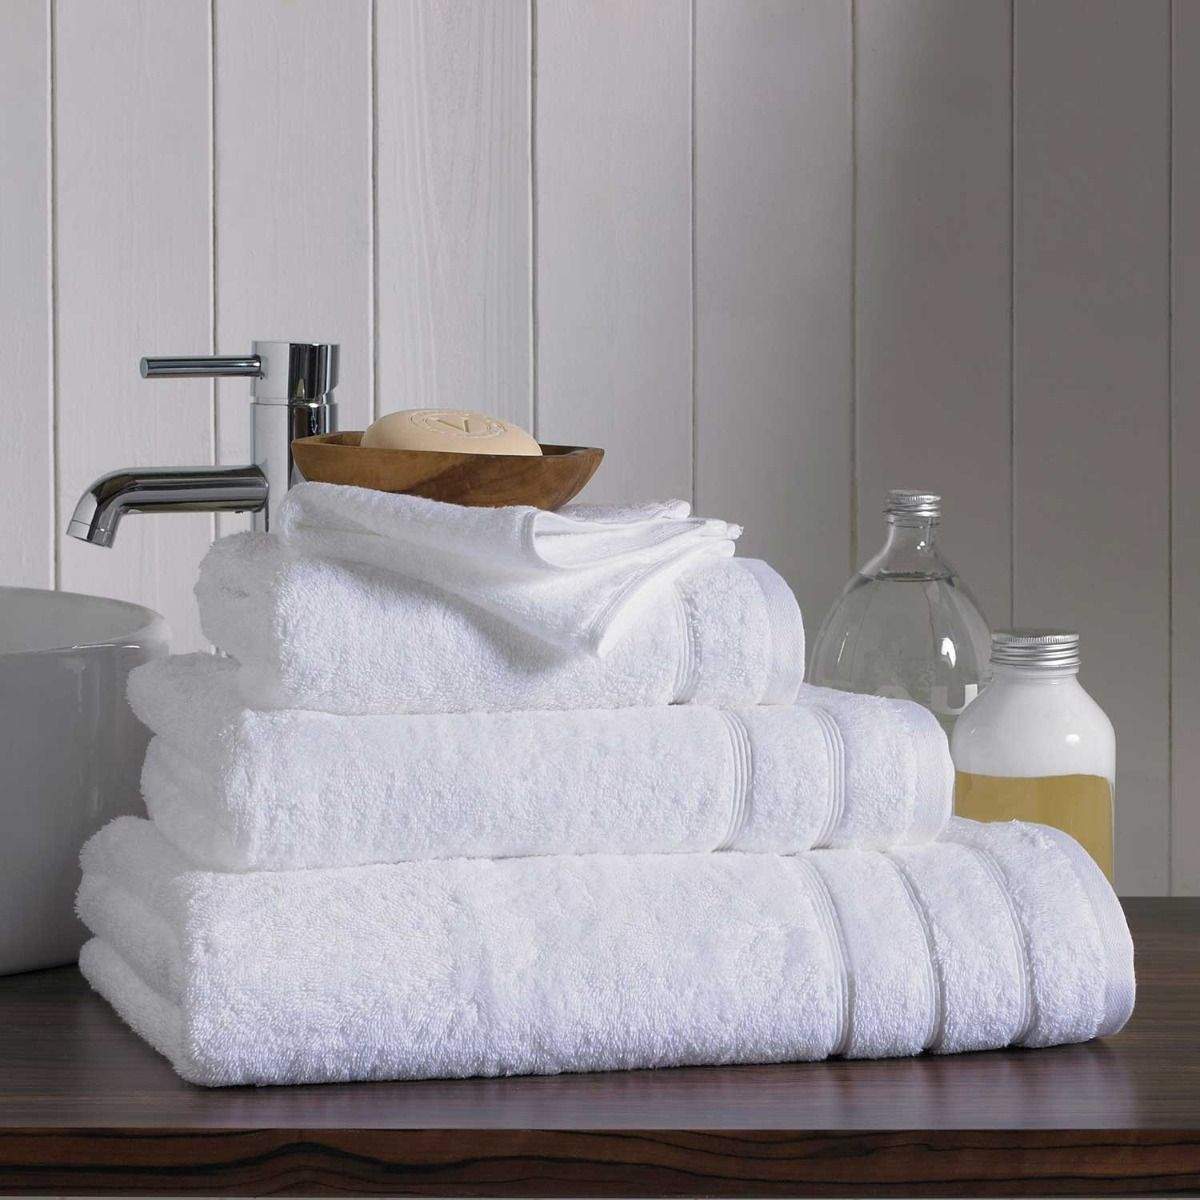 ULTRA SOFT AND HIGHLY ABSORBENT HOTEL QUALITY BATH LINEN PREMIUM 100% NATURAL COTTON TOWELS FOR SPA HOTEL AND HOME PACK OF 2 Bed and Bath Linen